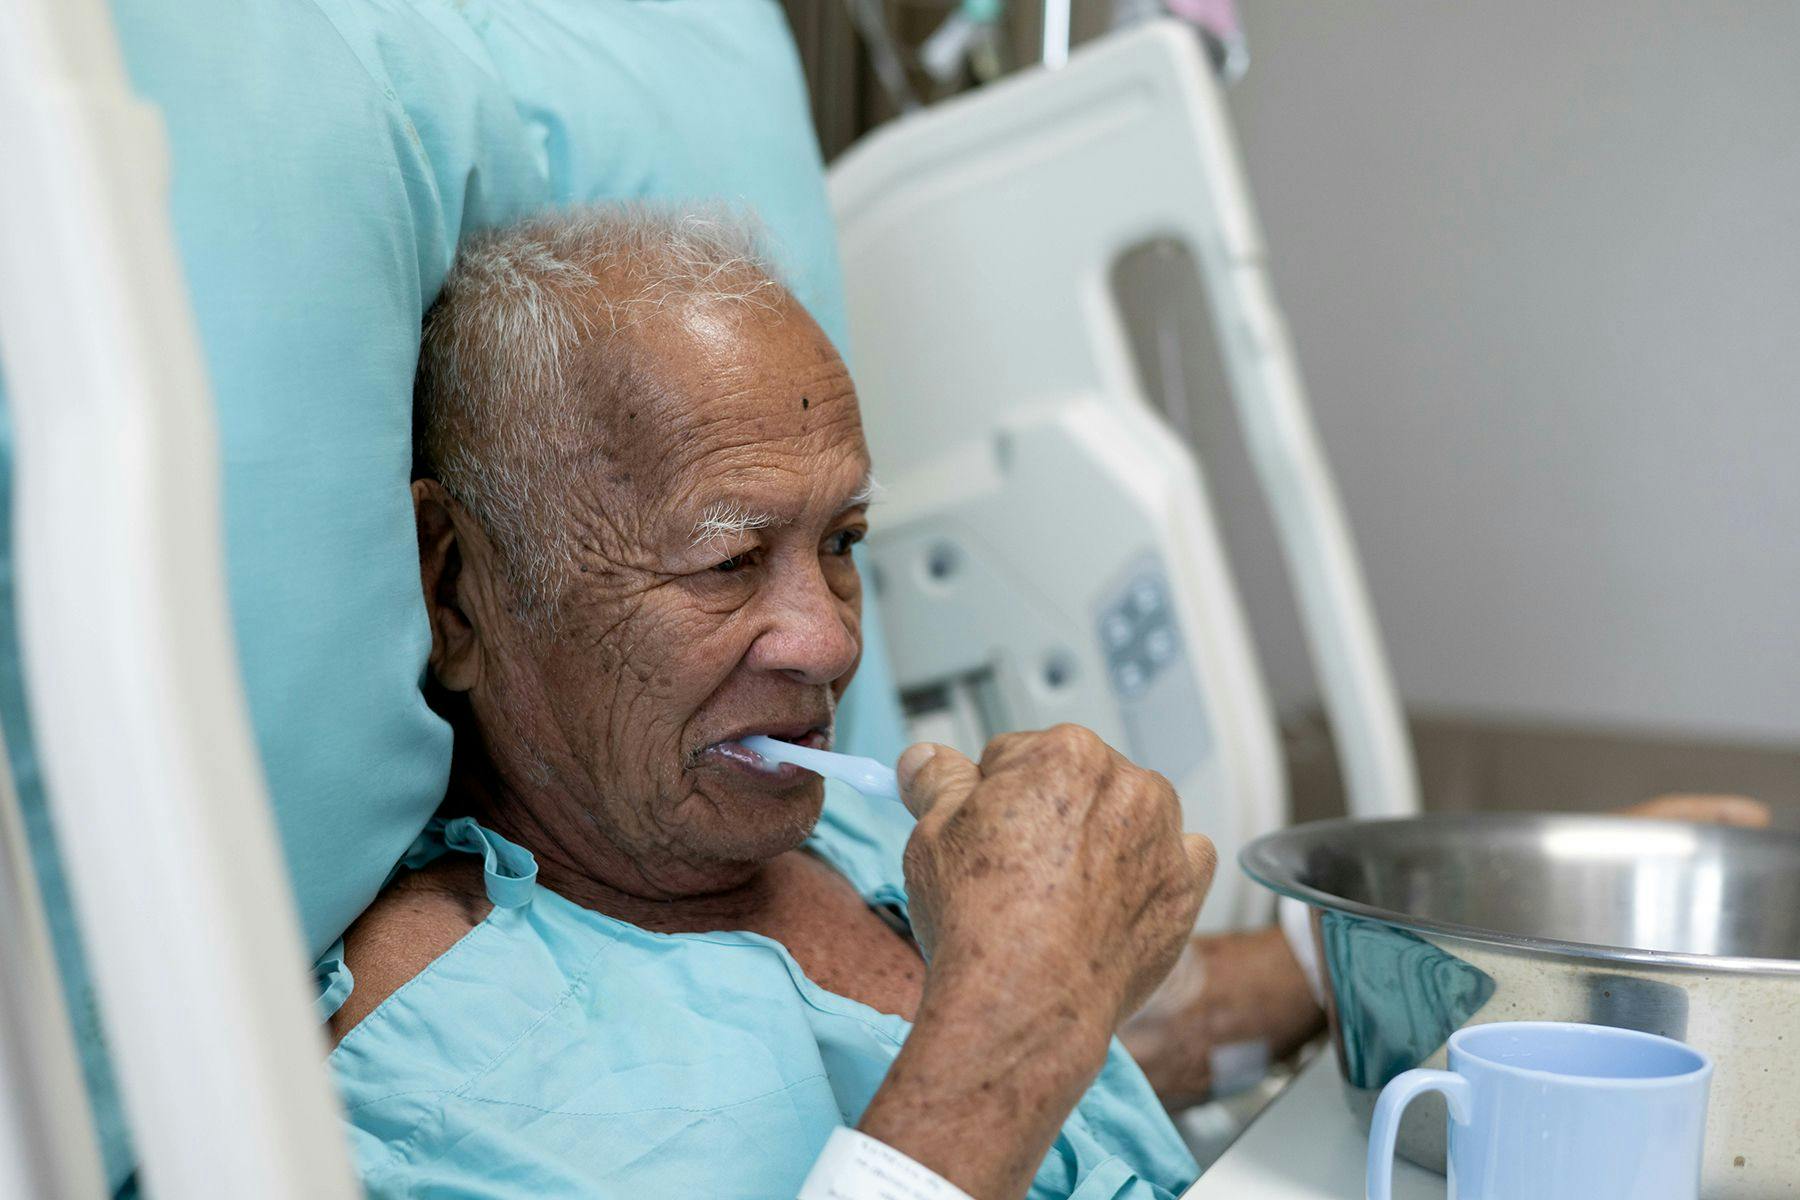 Mortality and Pneumonia Rates Decline When Hospital Patients Brush Their Teeth | Image Credit: © stock.adobe.com / Phimchanok